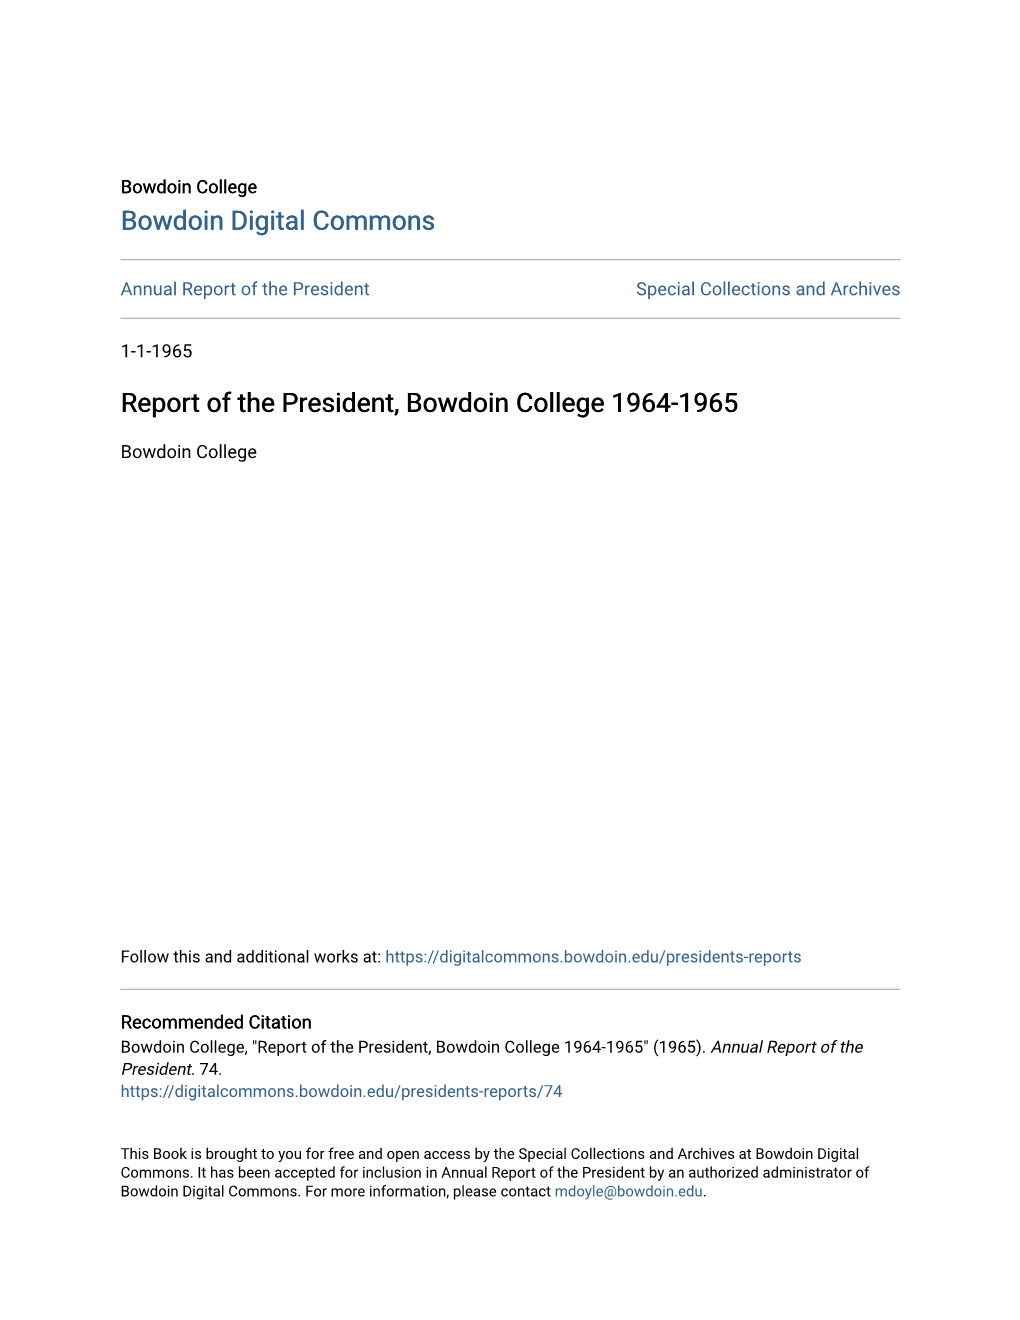 Report of the President, Bowdoin College 1964-1965